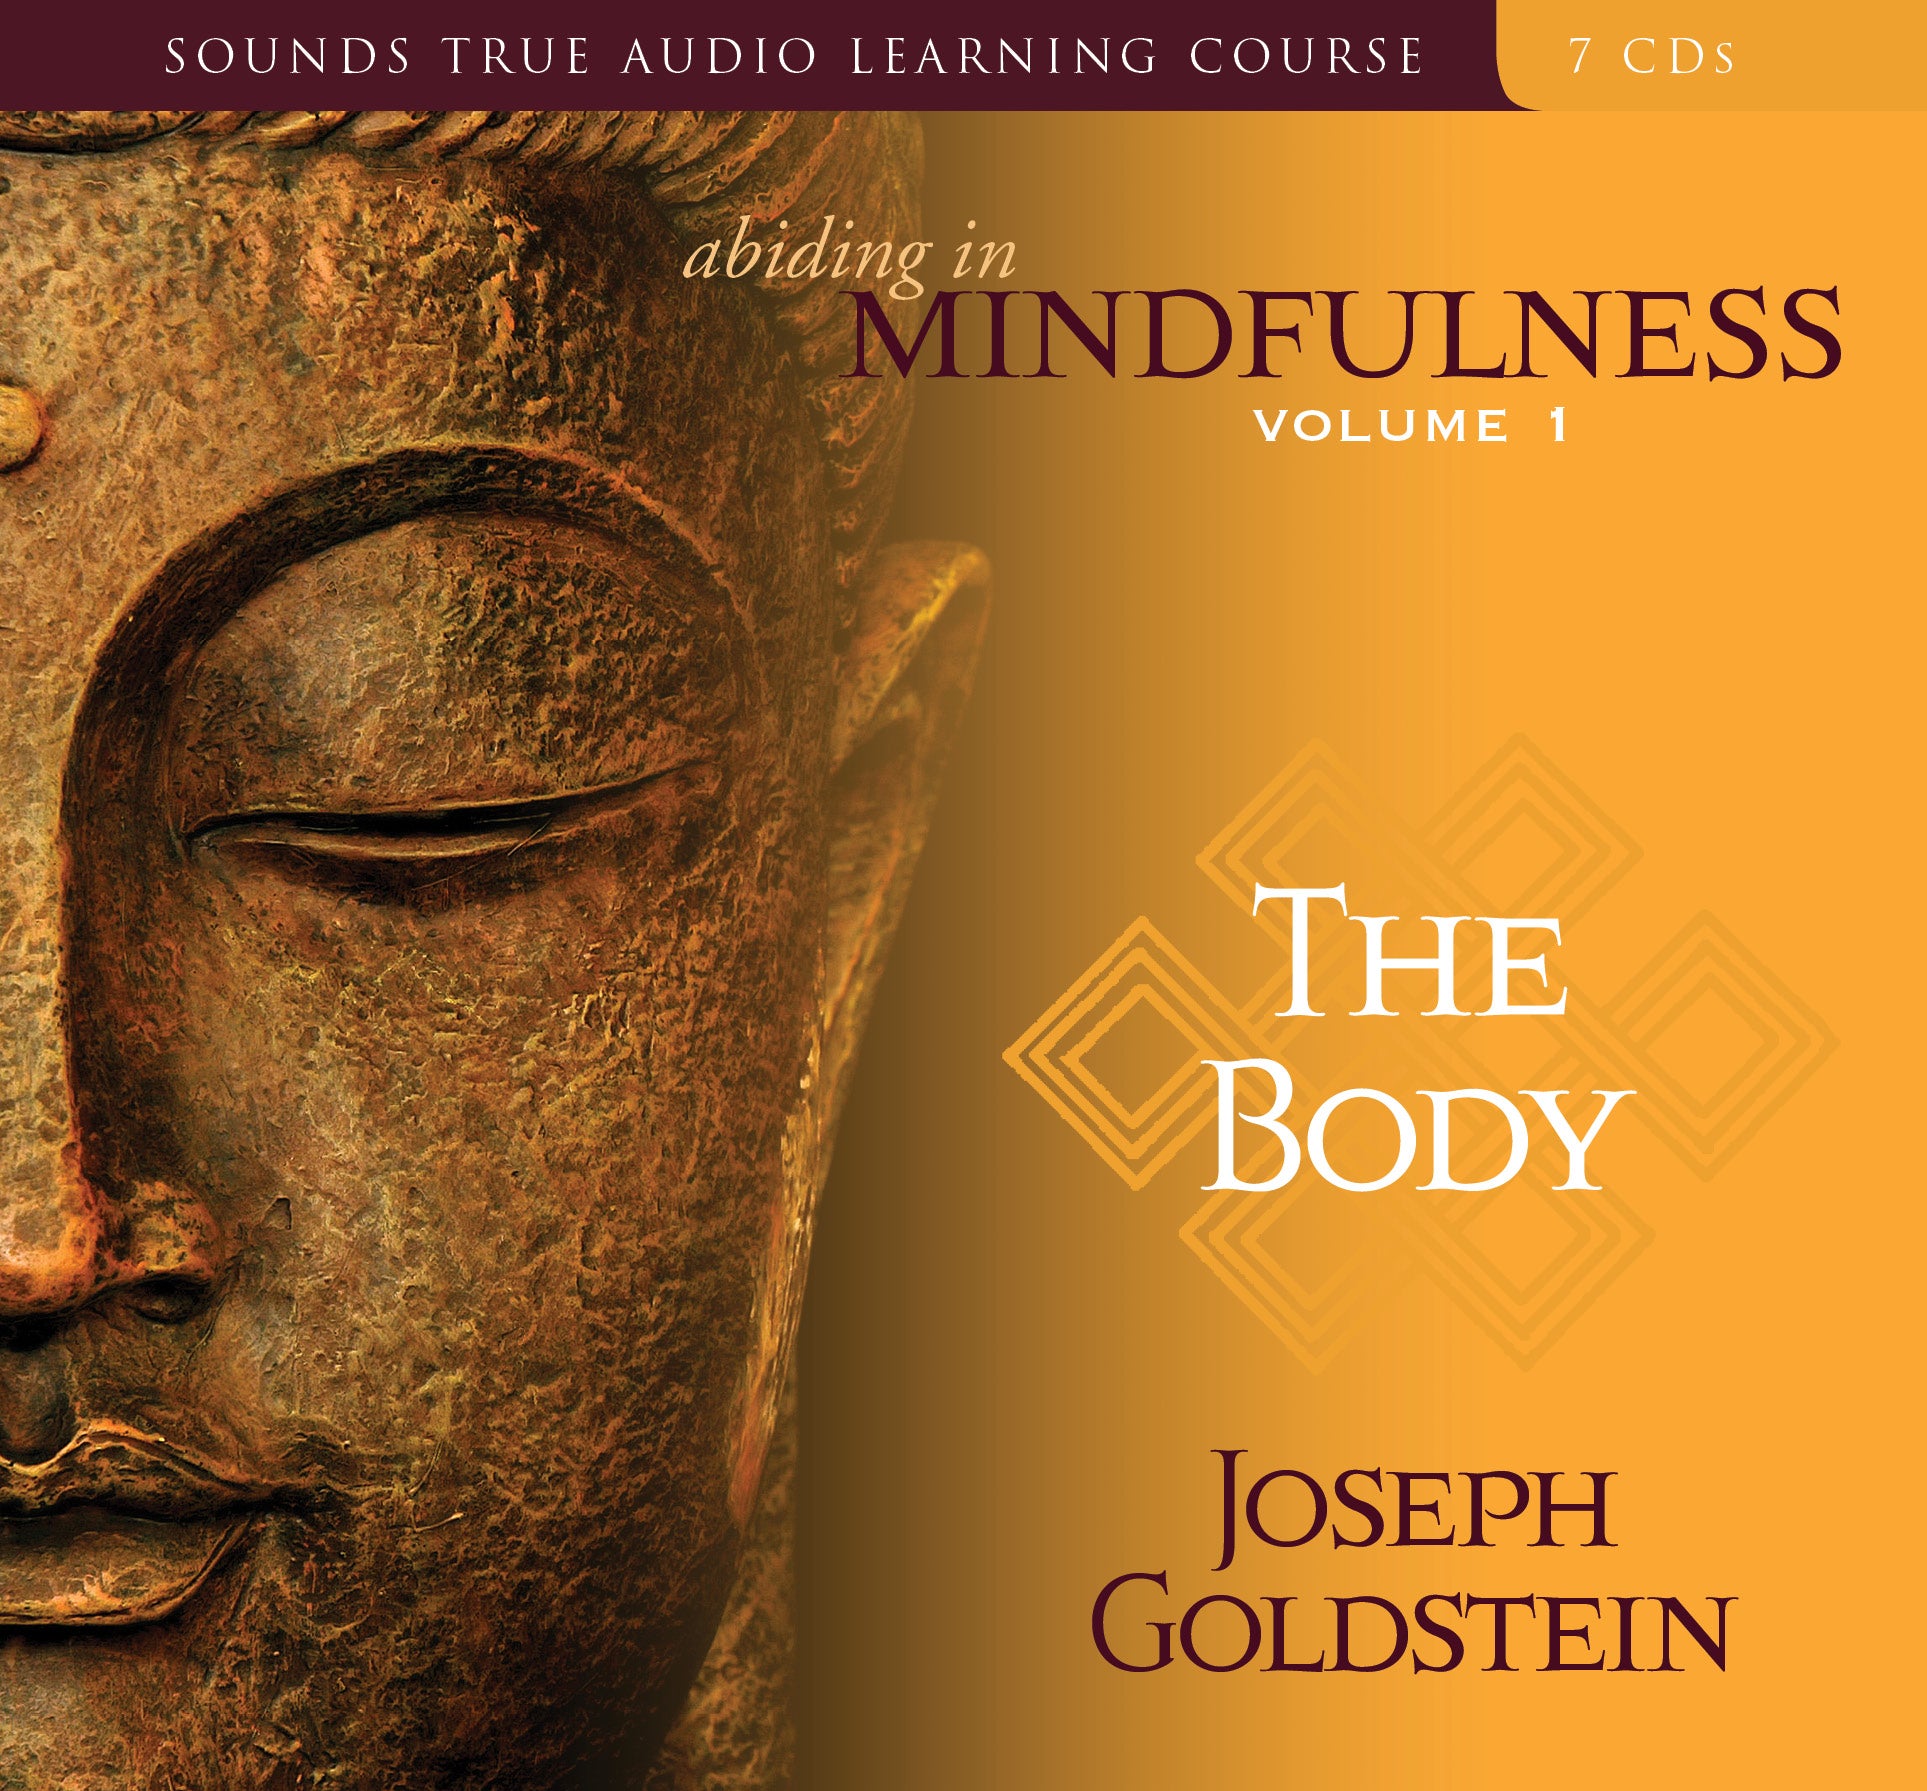 Abiding in Mindfulness Volume 1